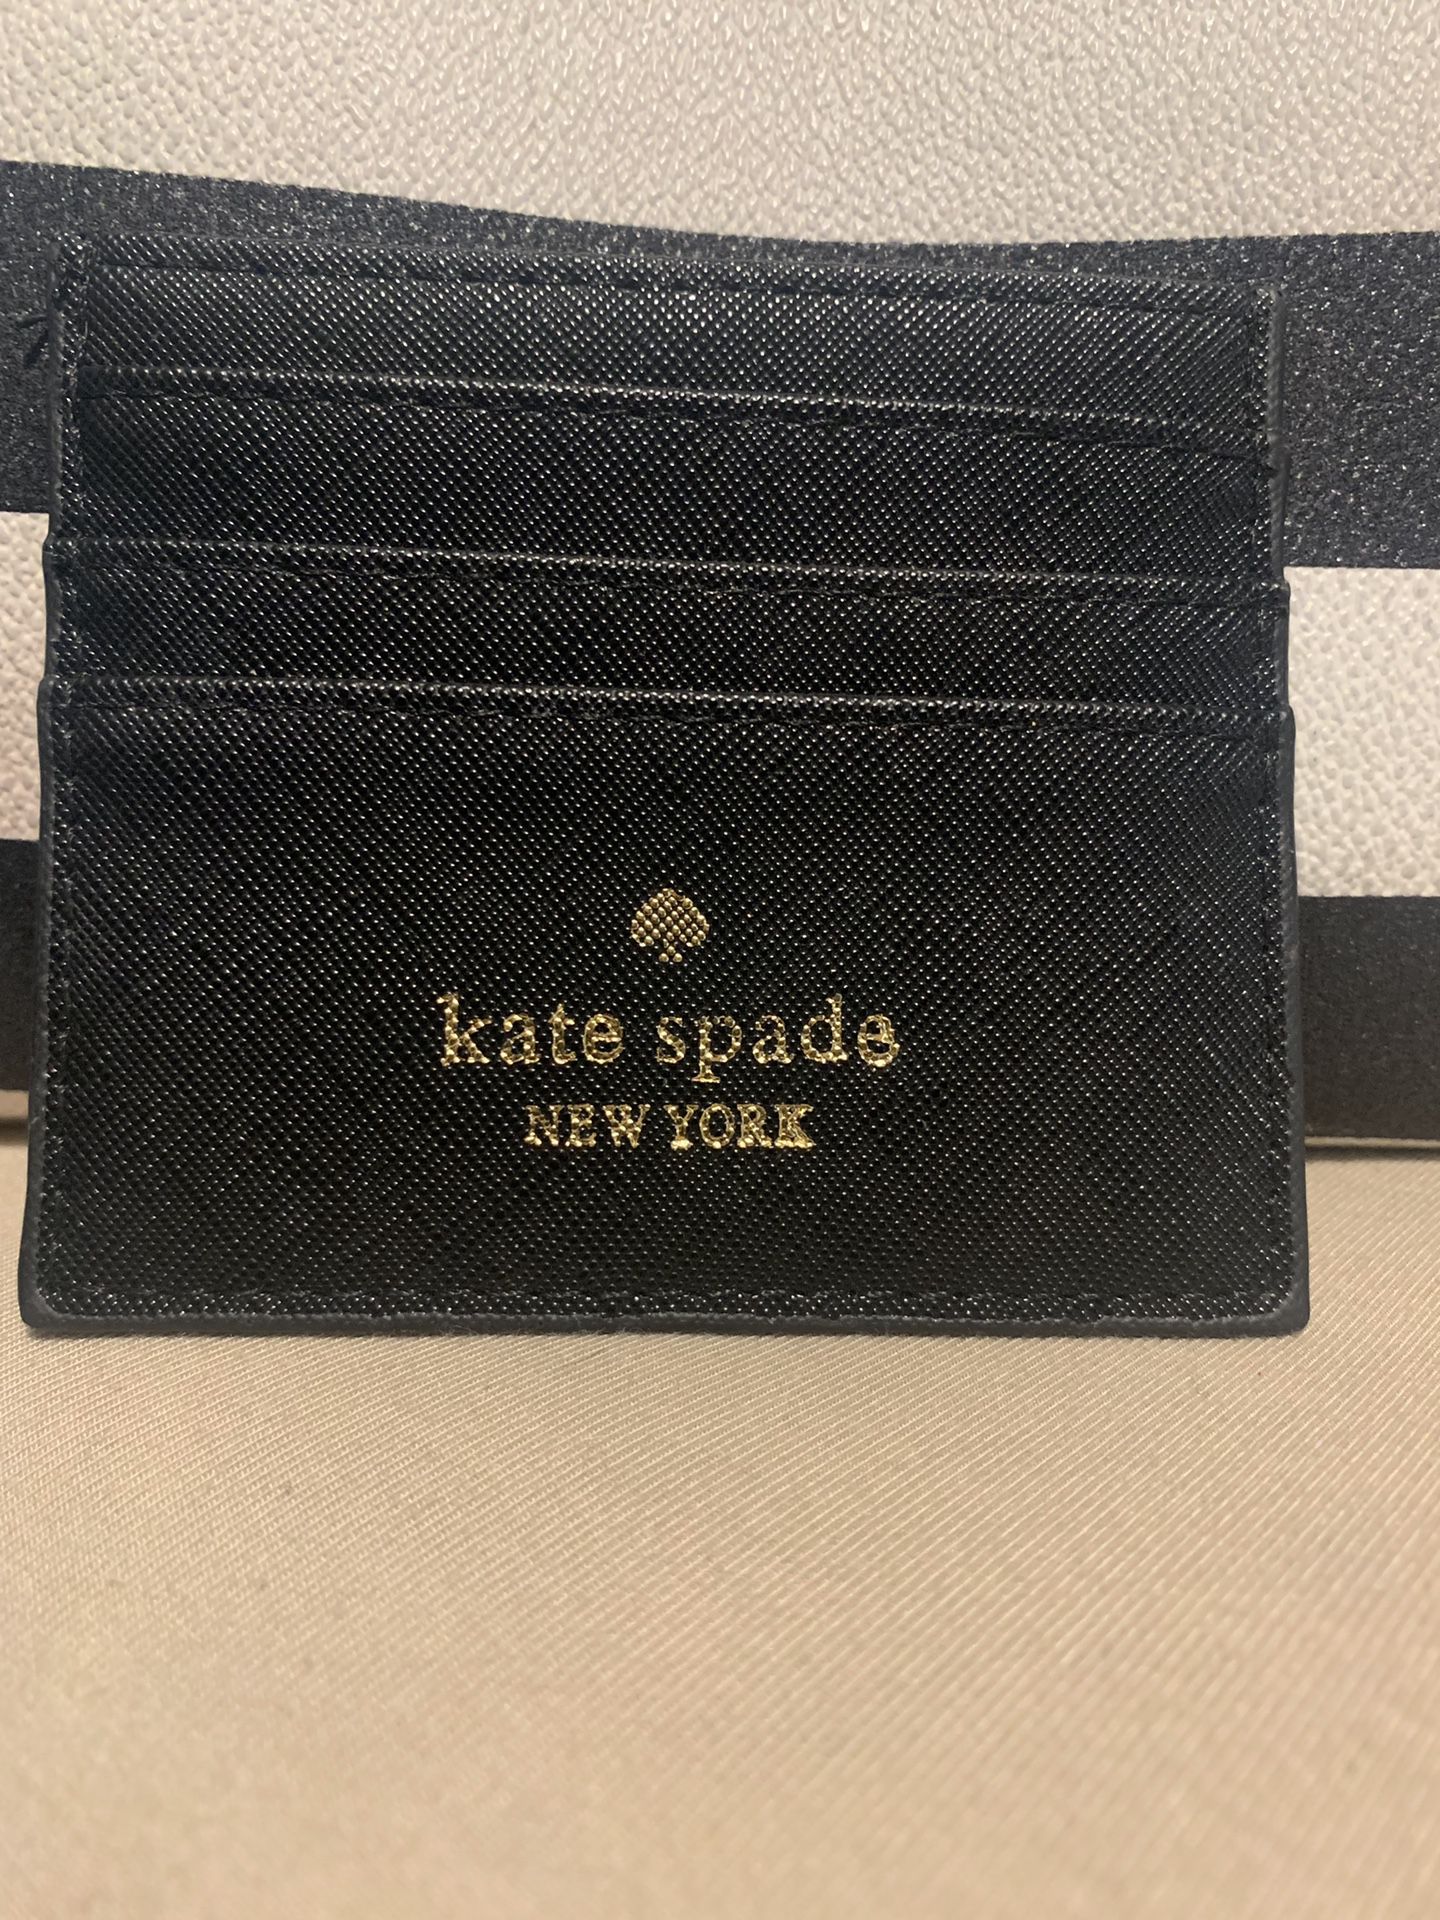 New With Tag Kate Spade Purse And Matching Wallet for Sale in Chicago, IL -  OfferUp